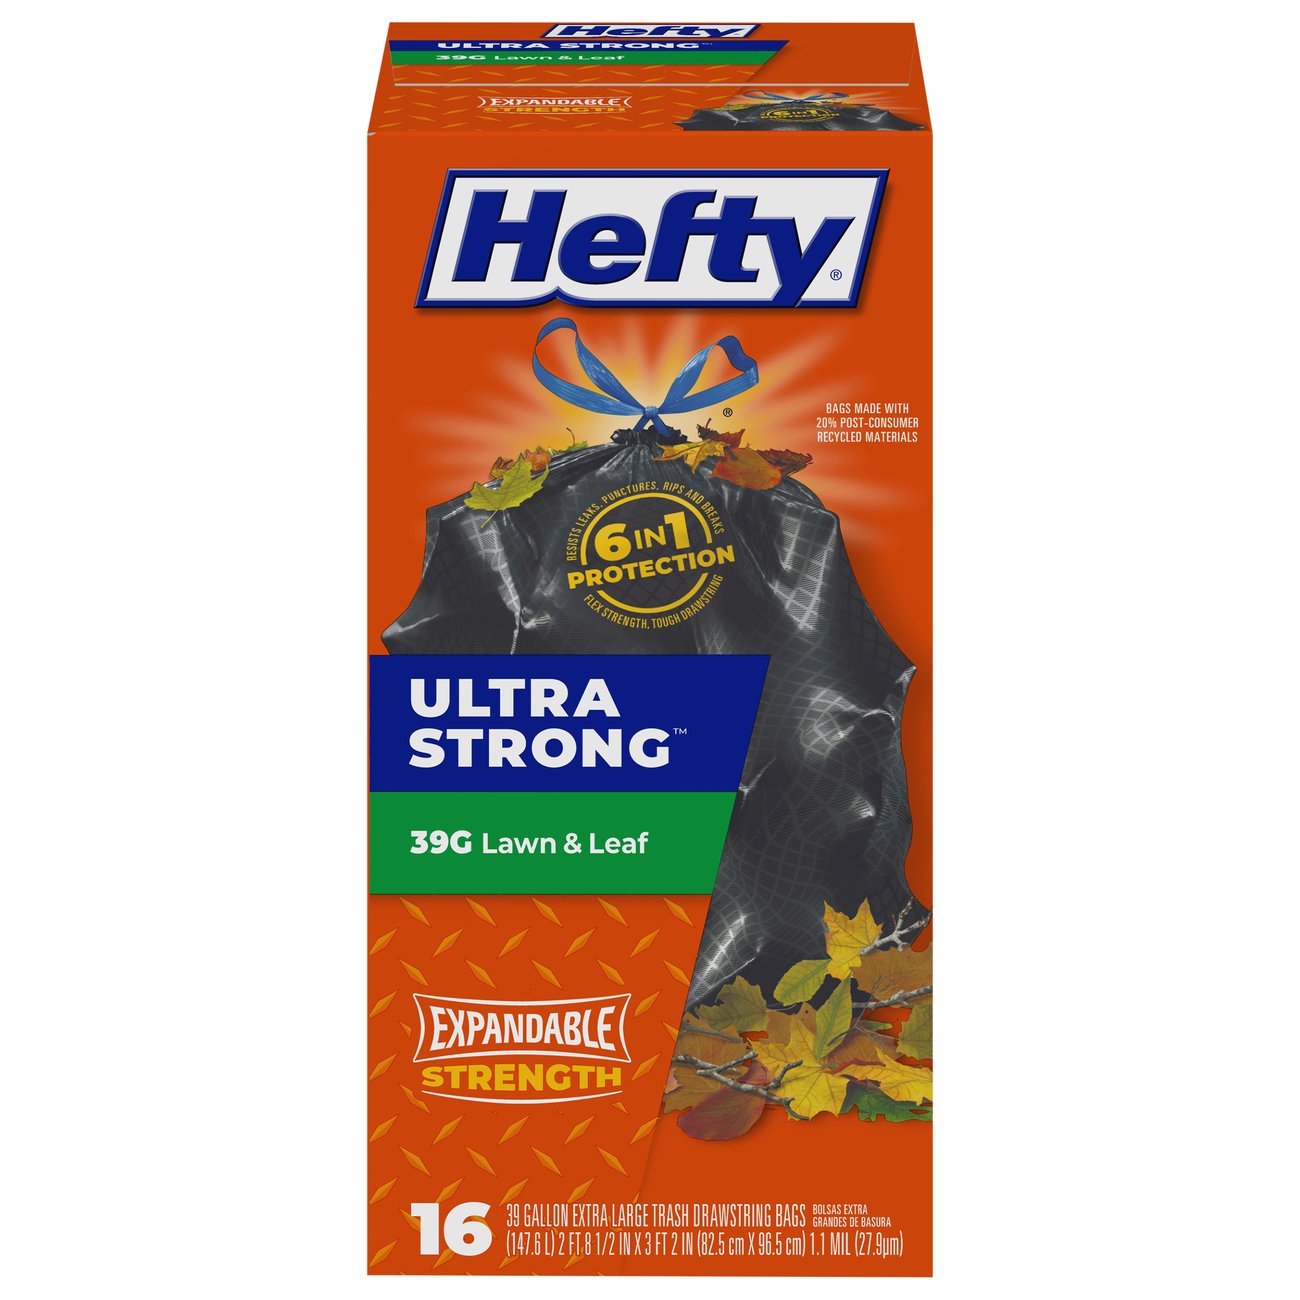 Hefty Ultra Strong Lawn & Leaf Scent Free Extra Large 39 Gallon